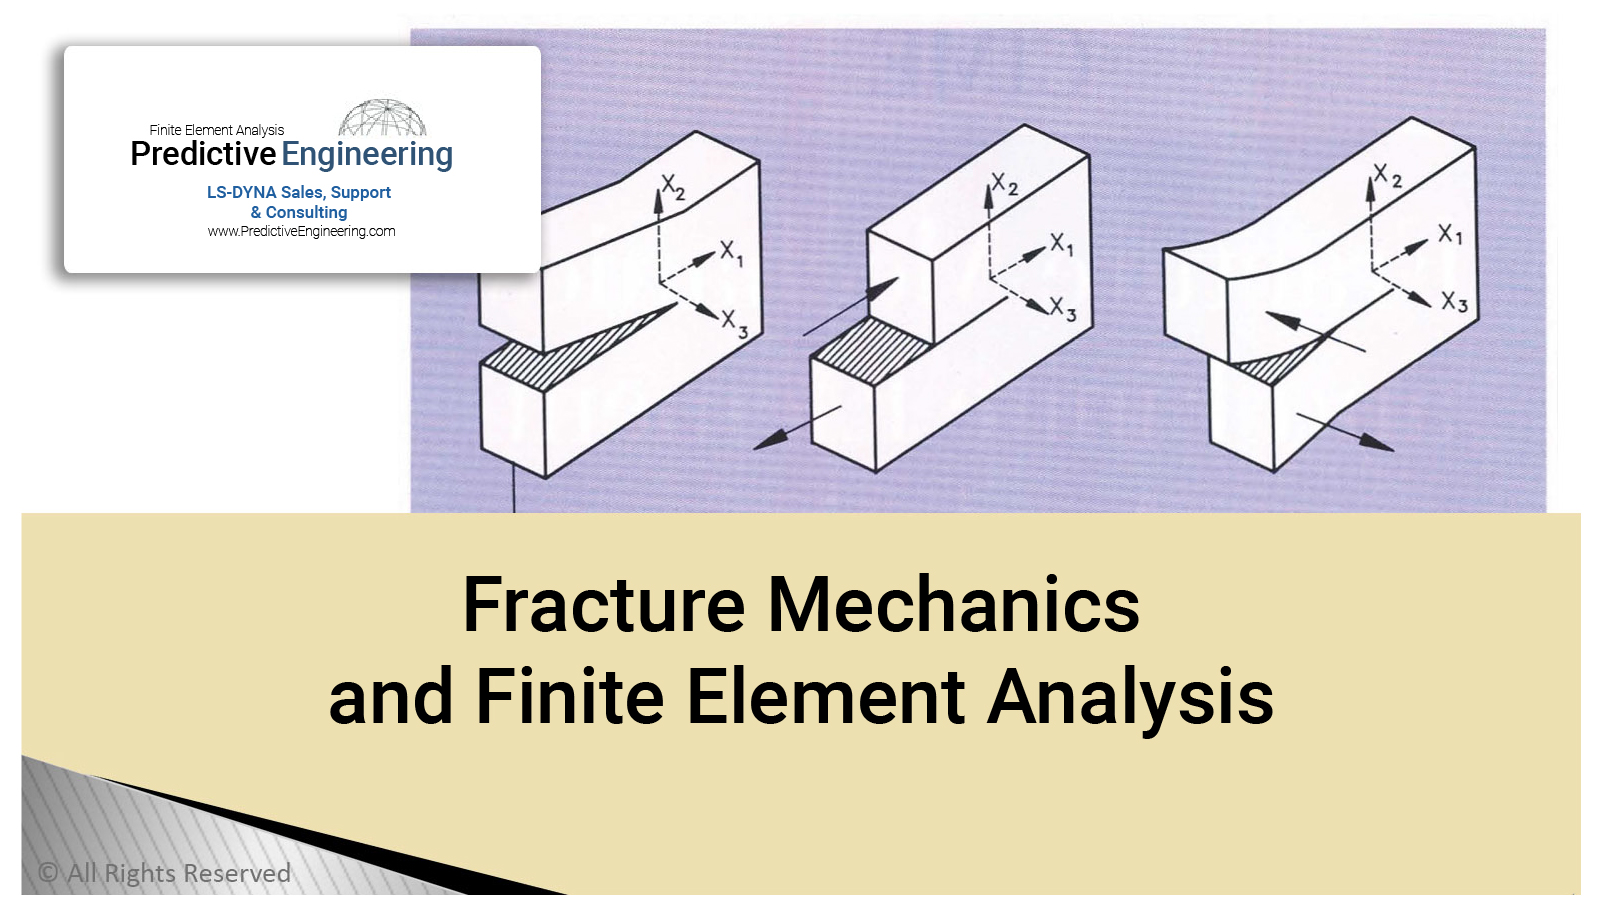 Fracture Mechanics and Finite Element Analysis Image